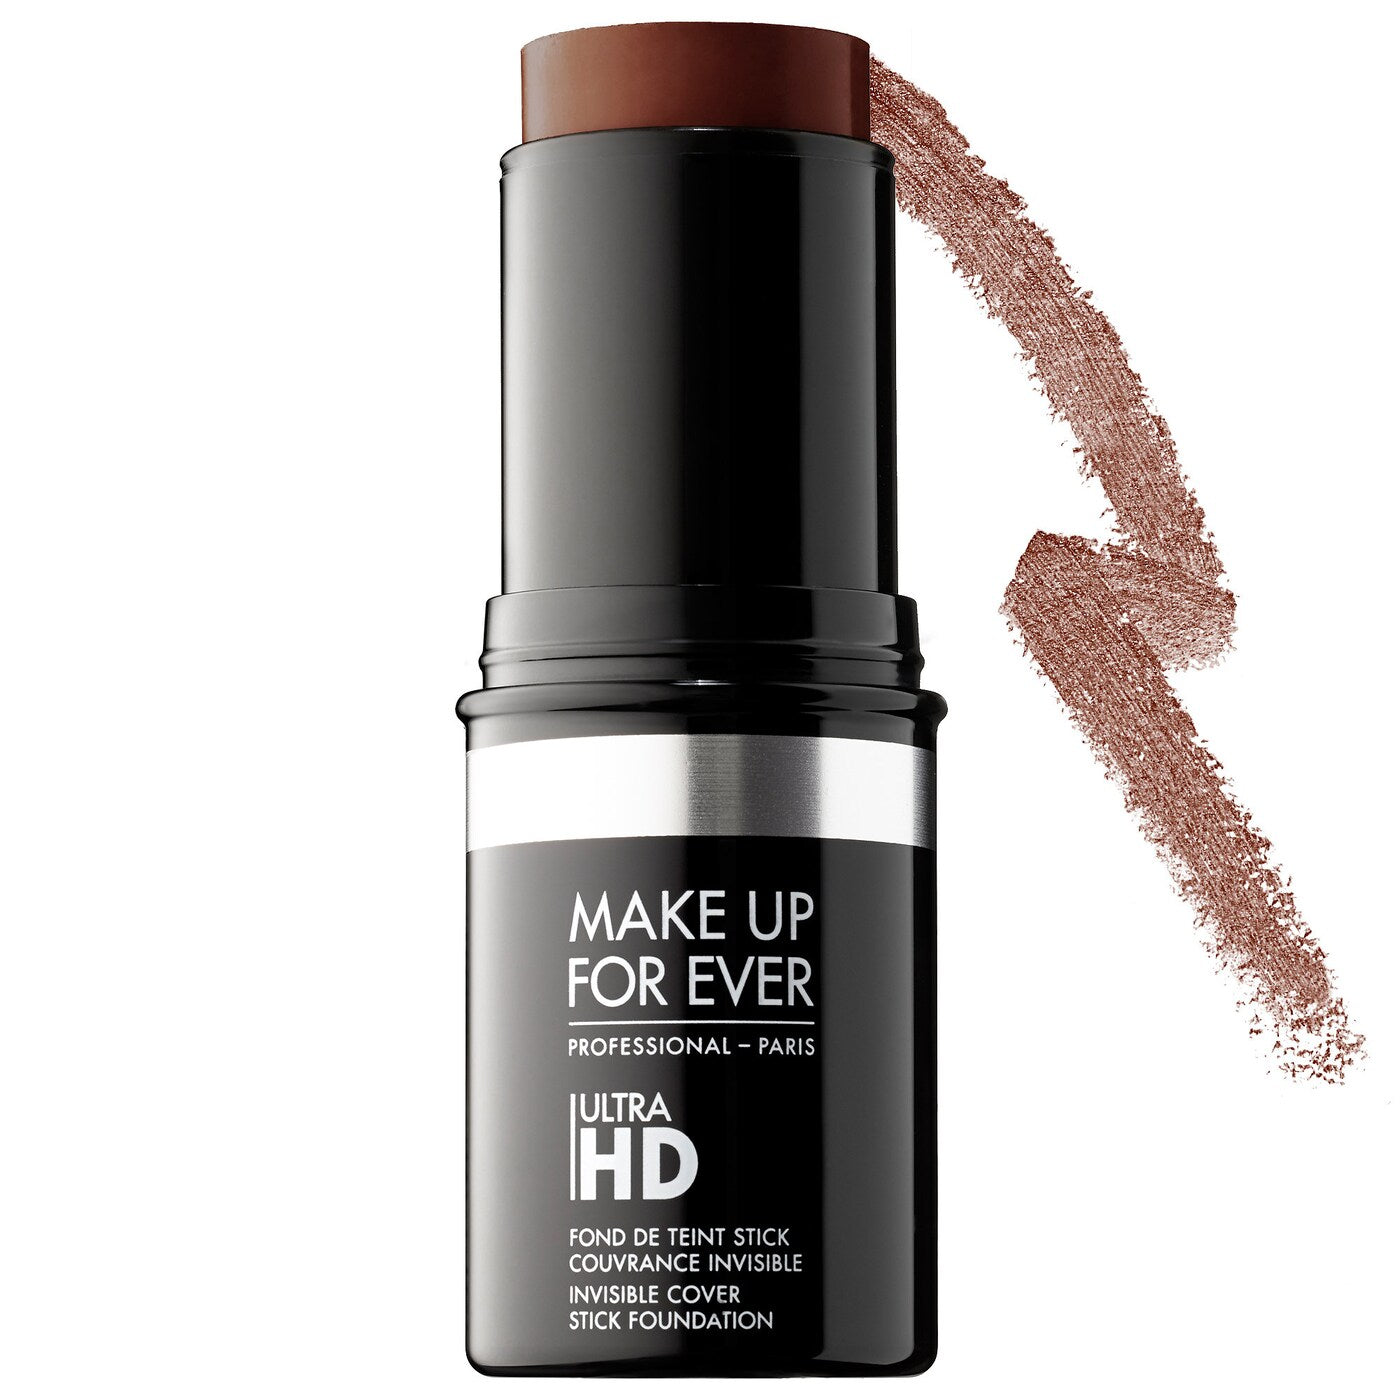 MAKE UP FOR EVER - Ultra HD Invisible Cover Stick Foundation | 12.5 g